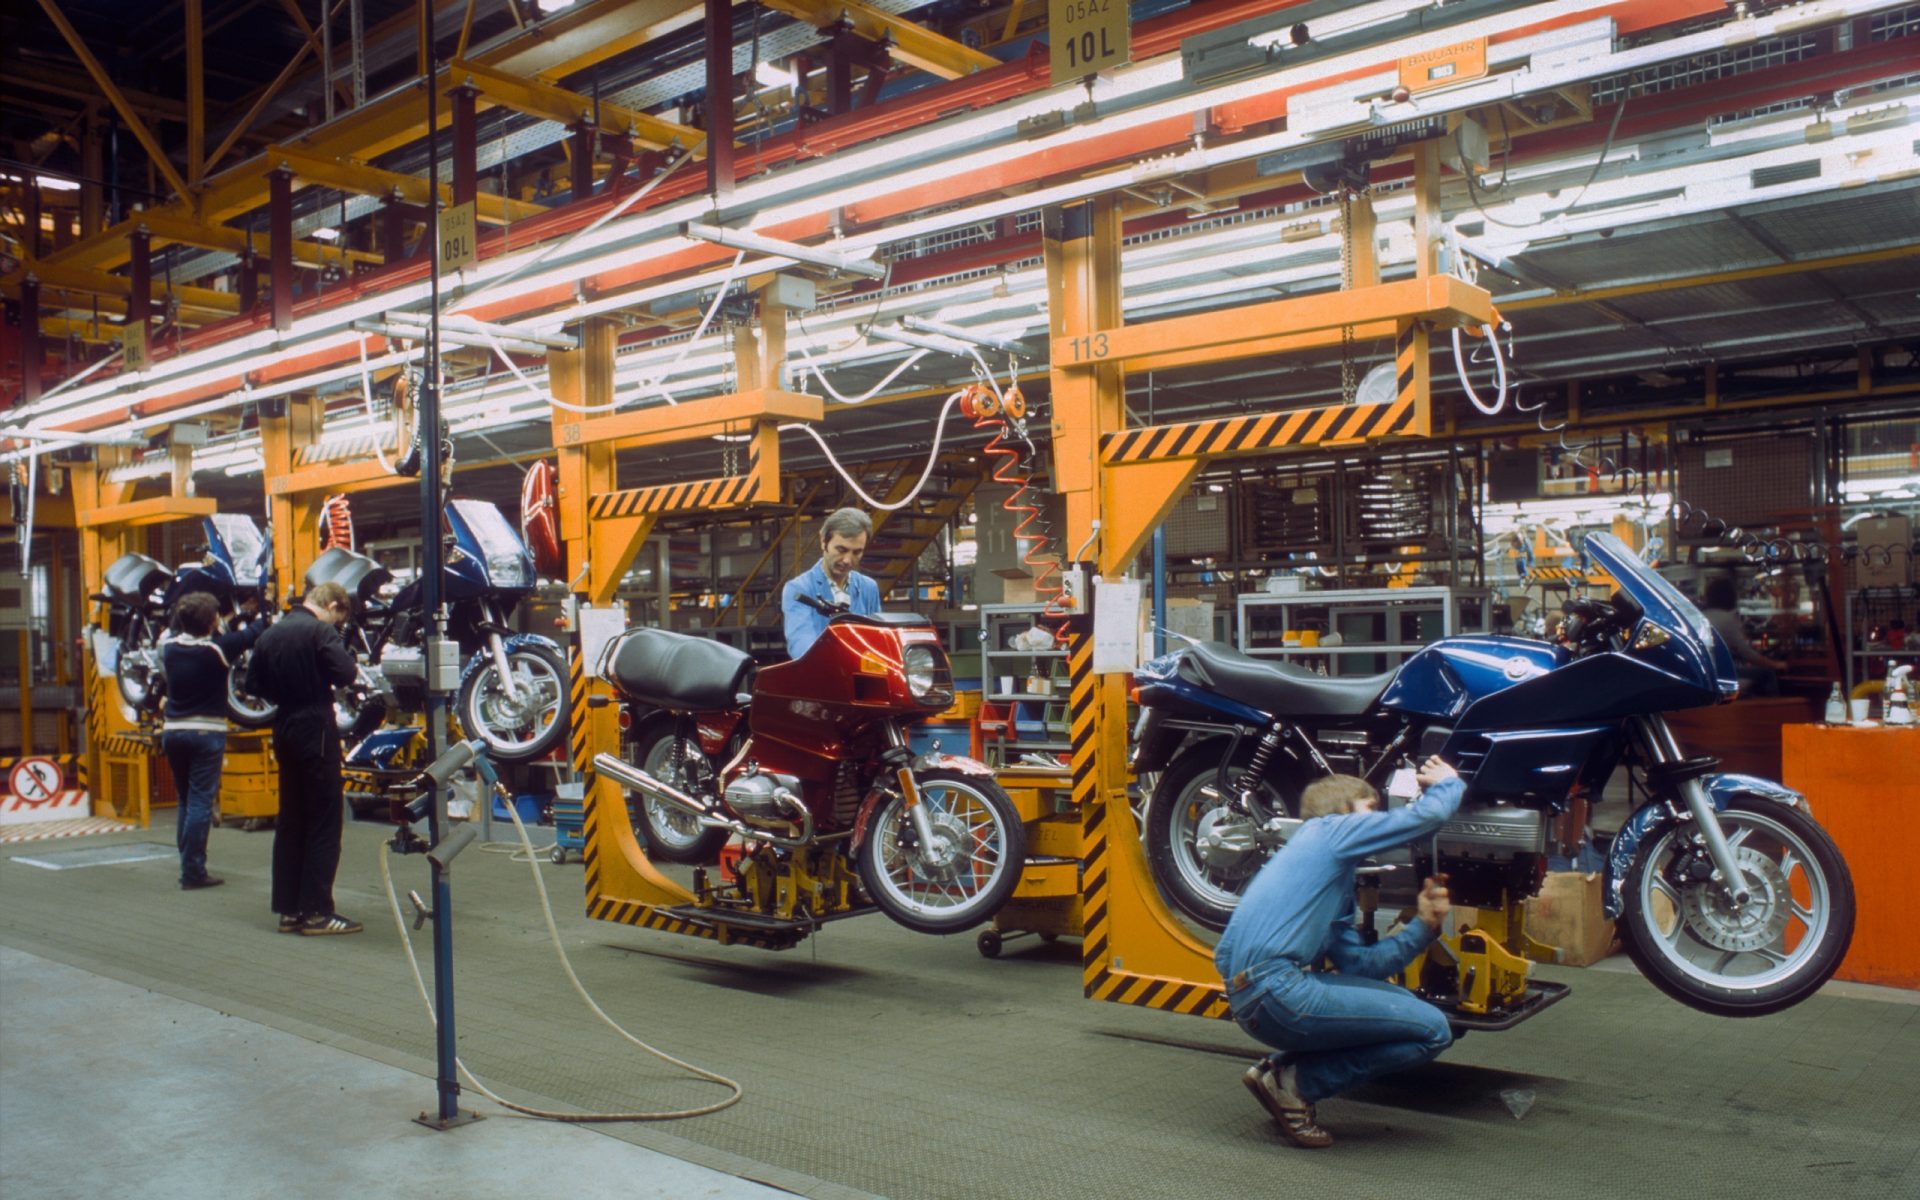 Assembly of BMW motorcycles